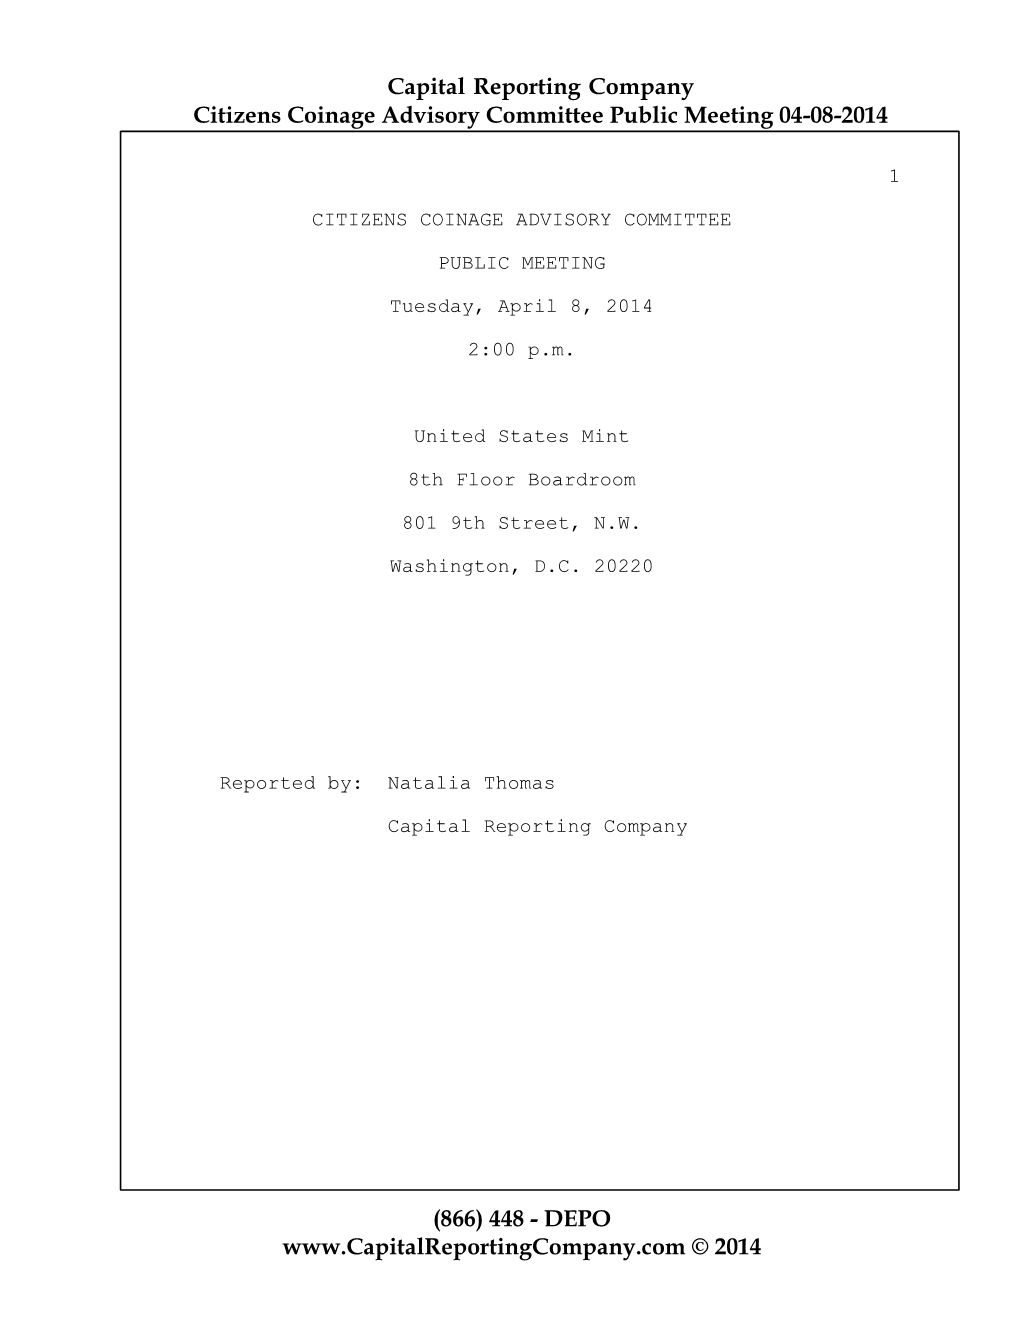 Capital Reporting Company Citizens Coinage Advisory Committee Public Meeting 04-08-2014